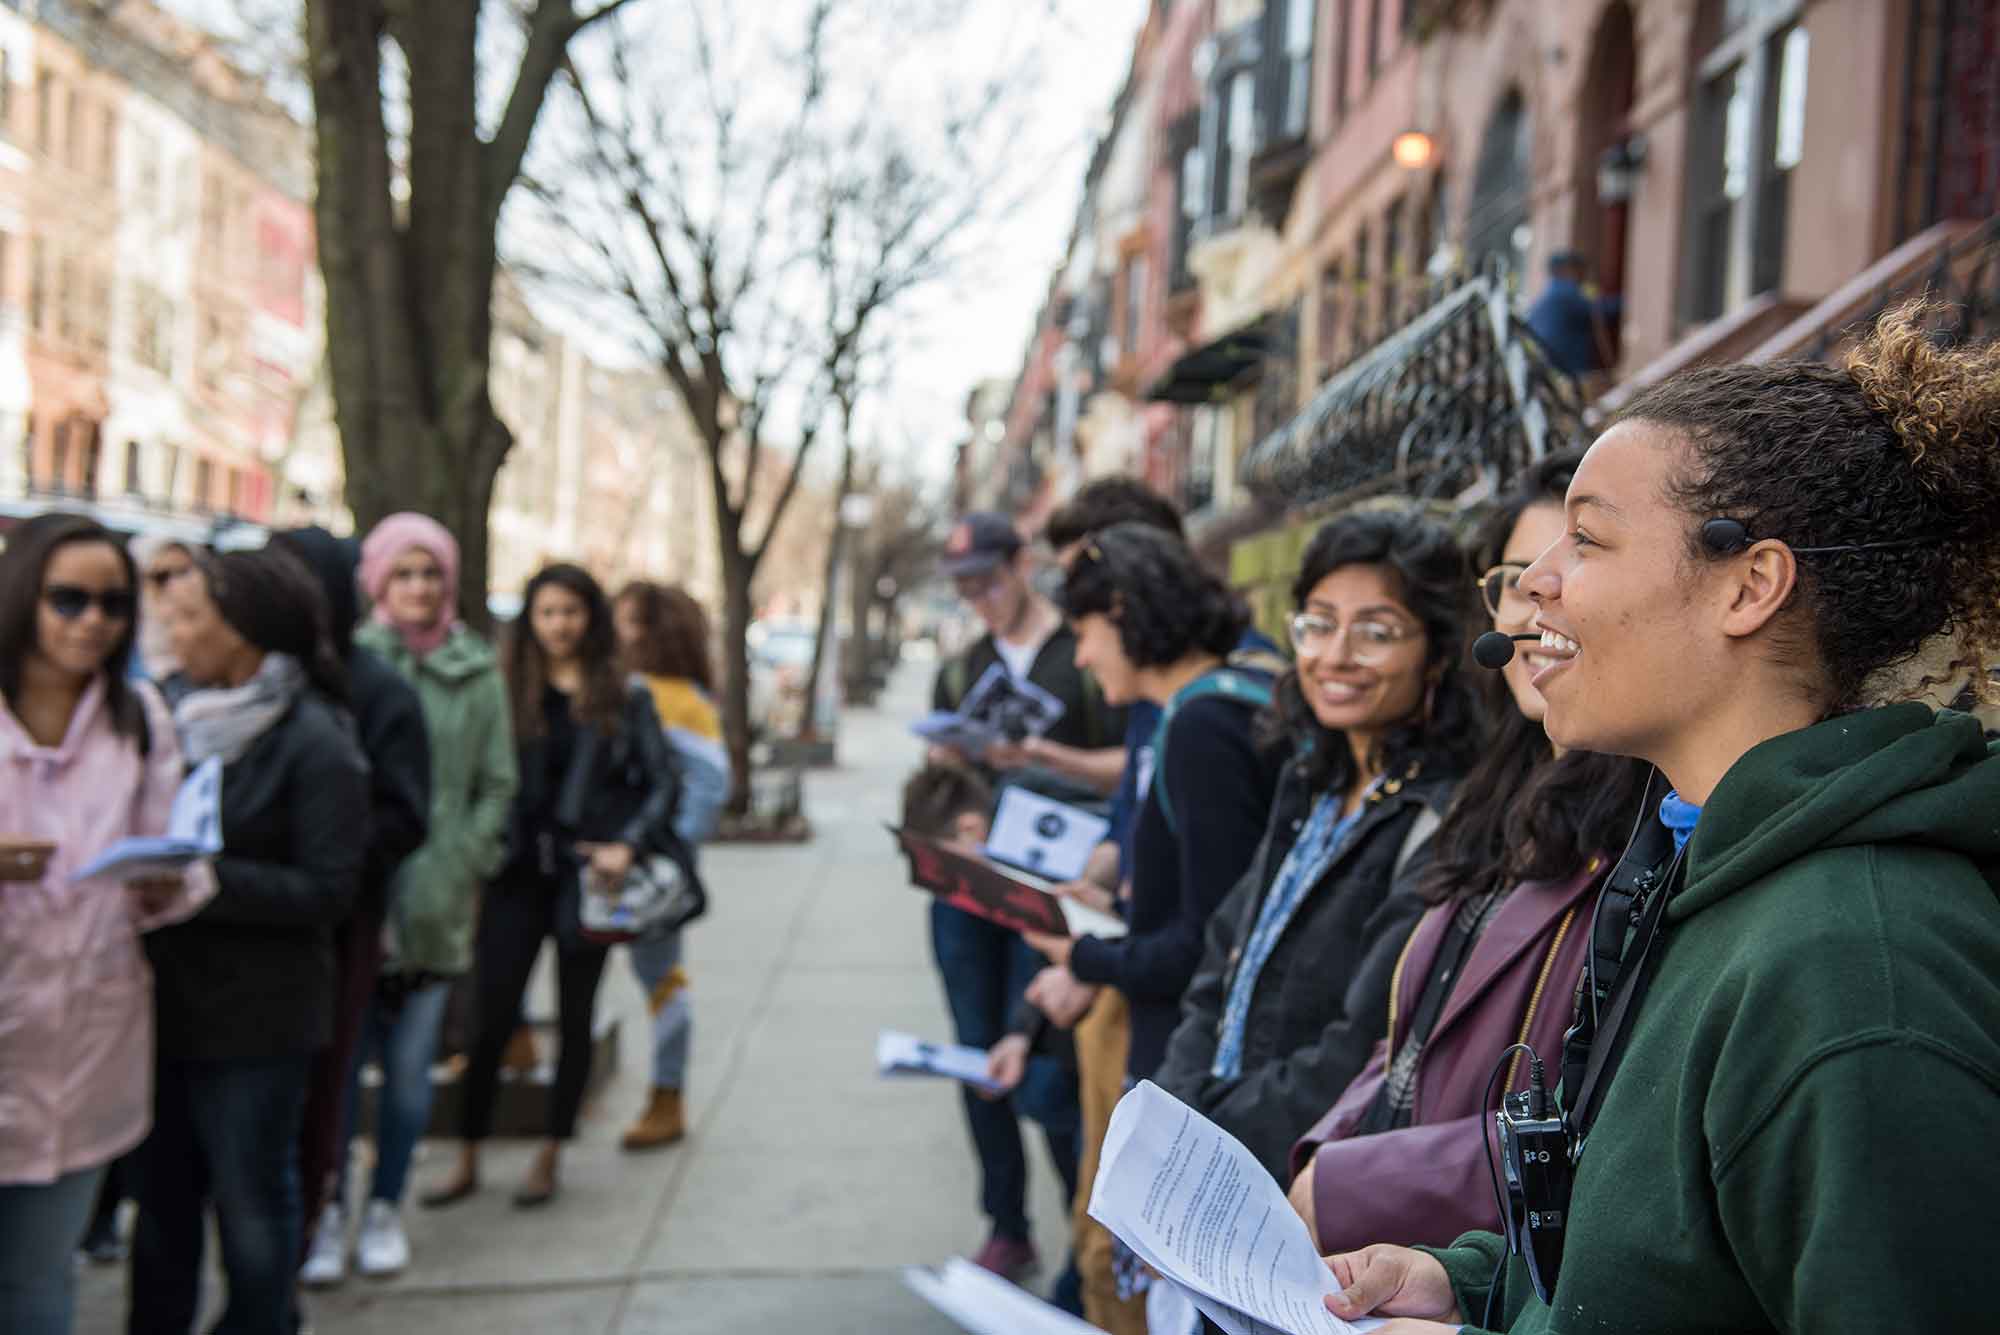 Asha Futterman leading the first walking tour on April 7, 2019 with over 35 people in attendance. Photo by Matt Harvey.